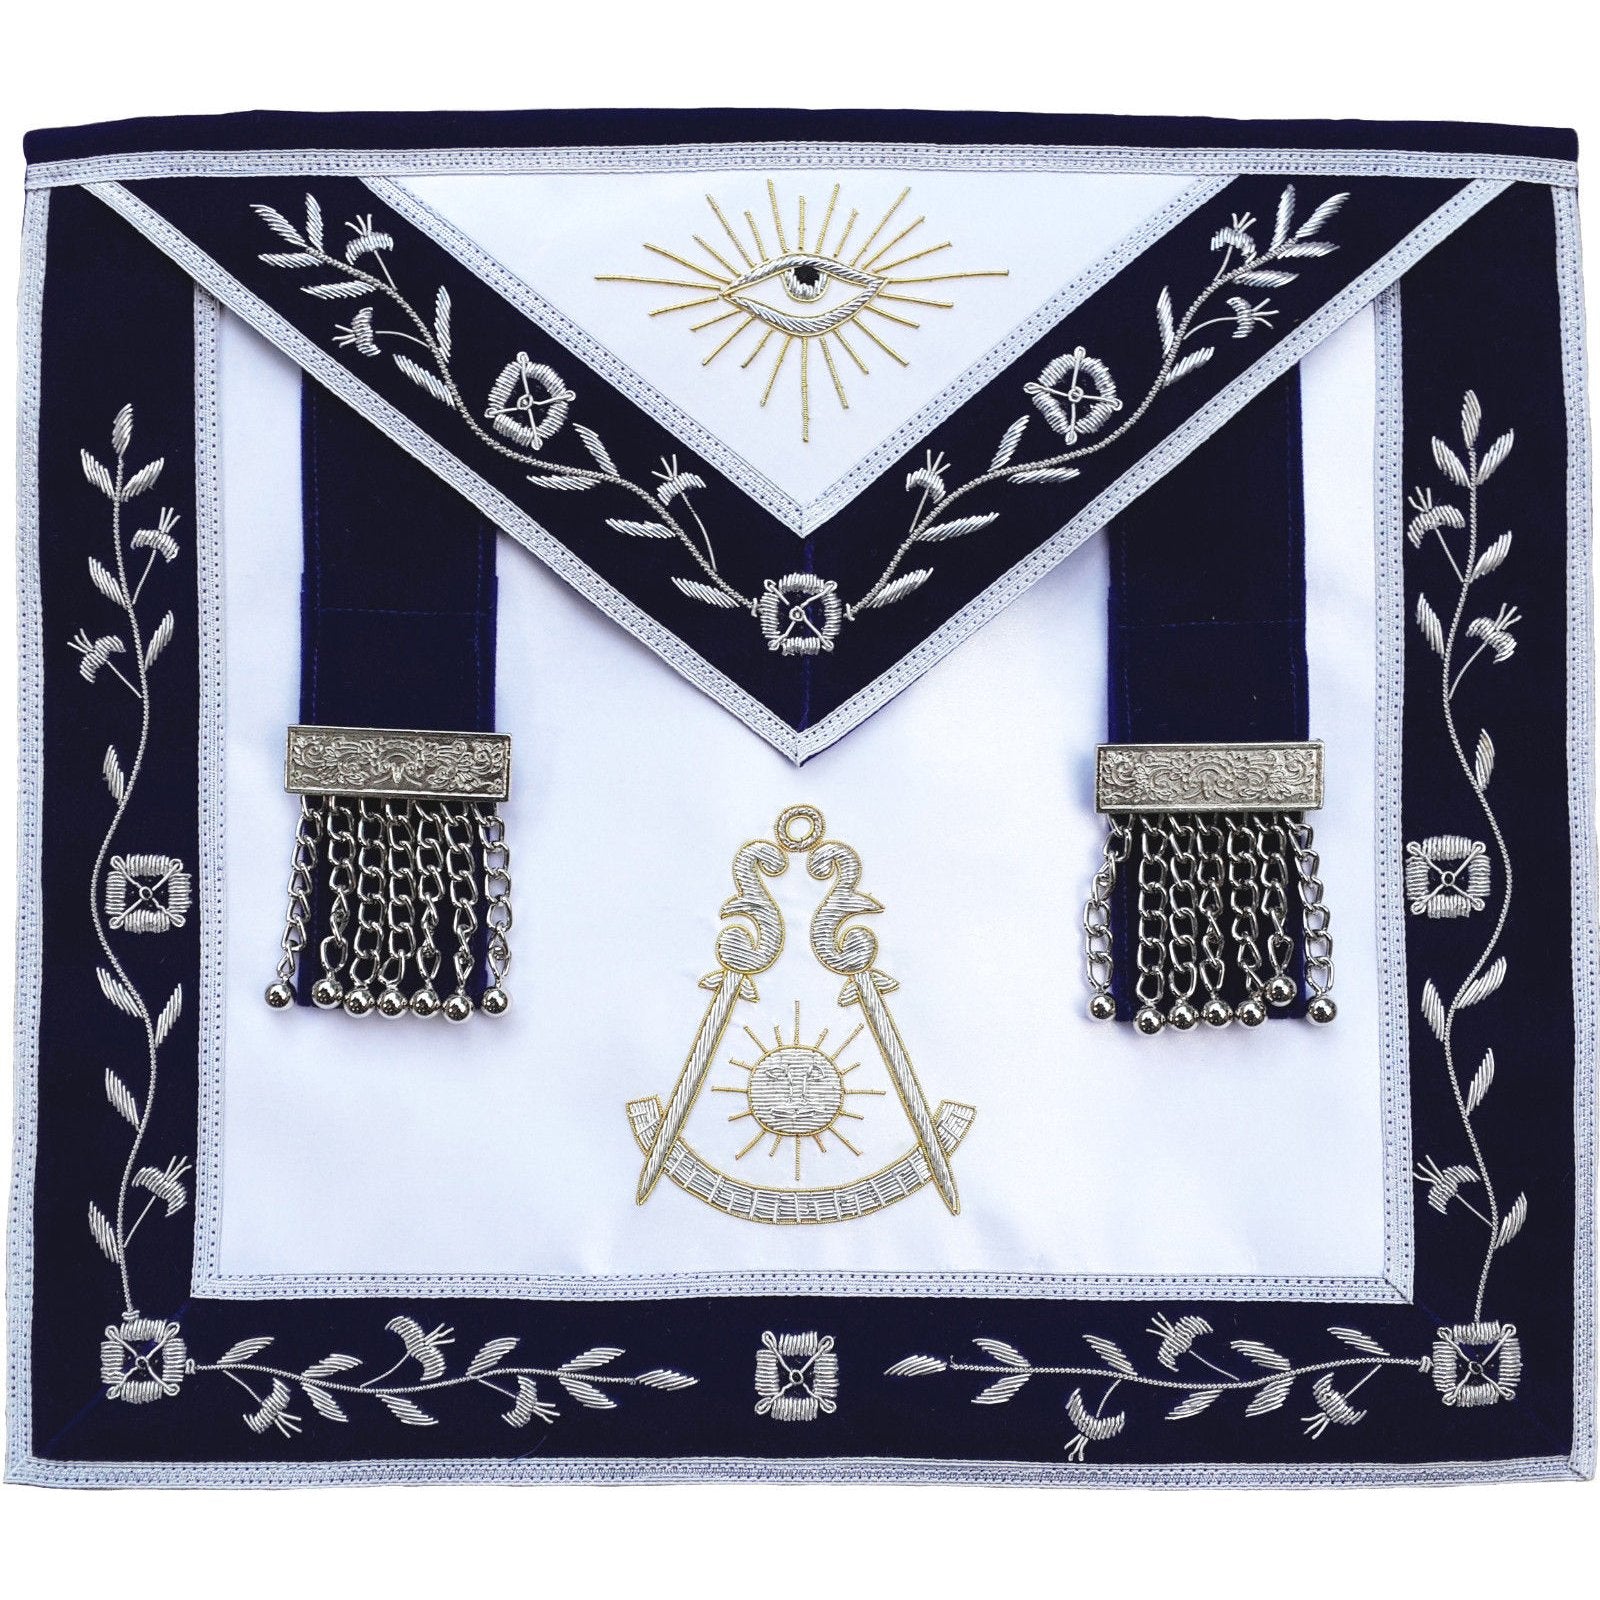 Past Master Blue Lodge Apron - Blue Velvet with Side Tabs & Silver Hand Embroidery - Bricks Masons